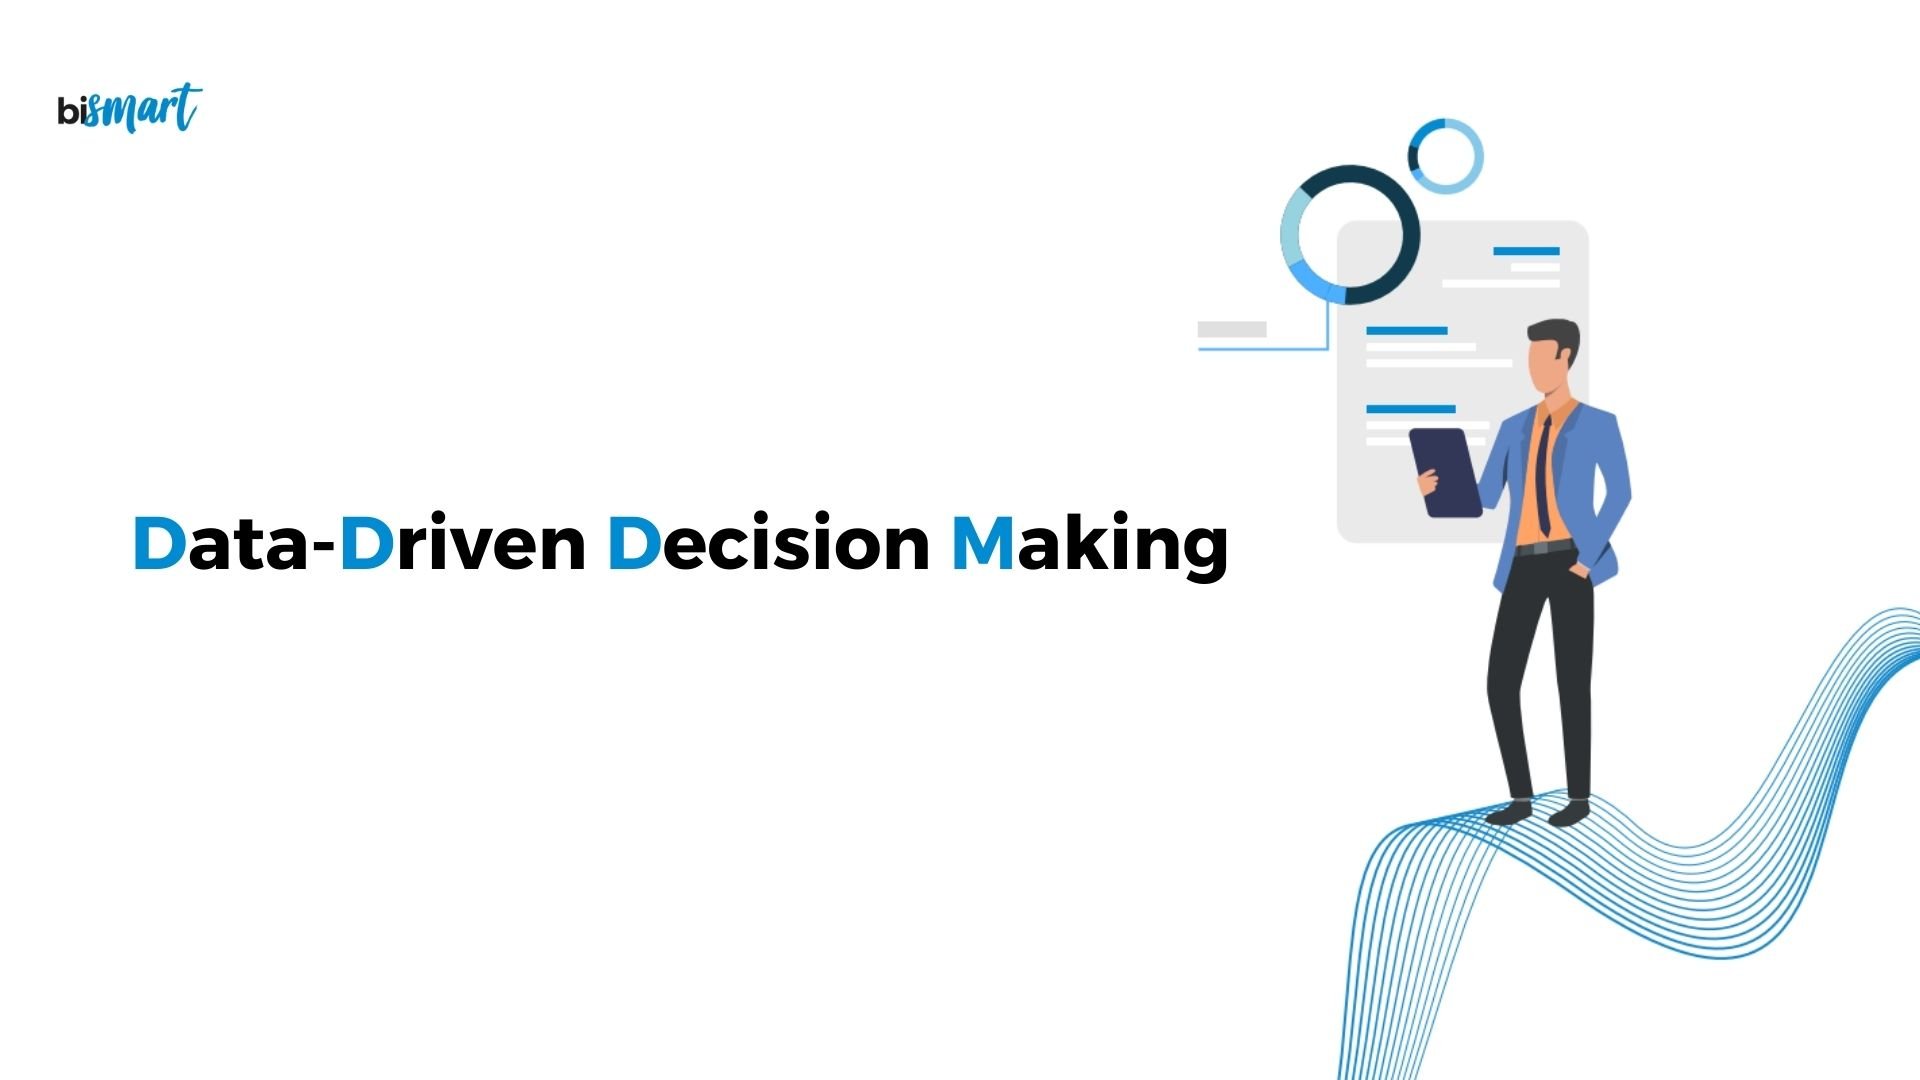 Data-Driven Decisions: Why Should Your Decisions Be Based on Data?